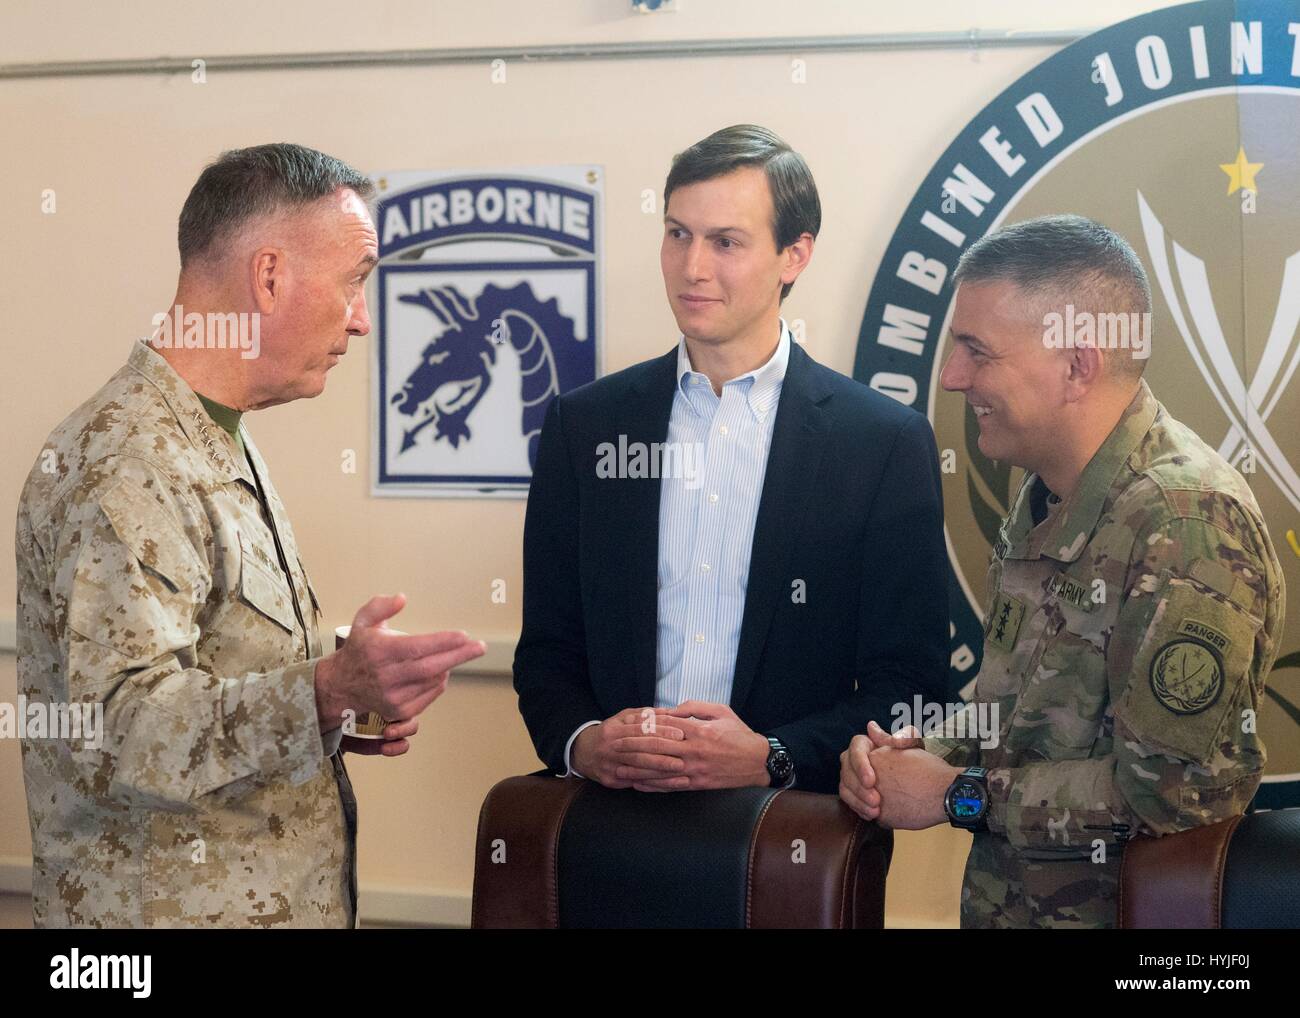 Baghdad, Iraq. 04th Apr, 2017. Jared Kushner, Senior Advisor and son-in-law to President Trump, center, chats with U.S. Joint Chiefs Chairman Gen. Joseph Dunford, left, and Lt. Gen. Stephen Townsend at CJTOFOIR headquarters April 4, 2017 in Baghdad, Iraq. U.S. Joint Chiefs Chairman Gen. Joseph Dunford, and Kushner are on a fact finding mission to Iraq to view the progress to recapture Mosul from the Islamic State. Credit: Planetpix/Alamy Live News Stock Photo